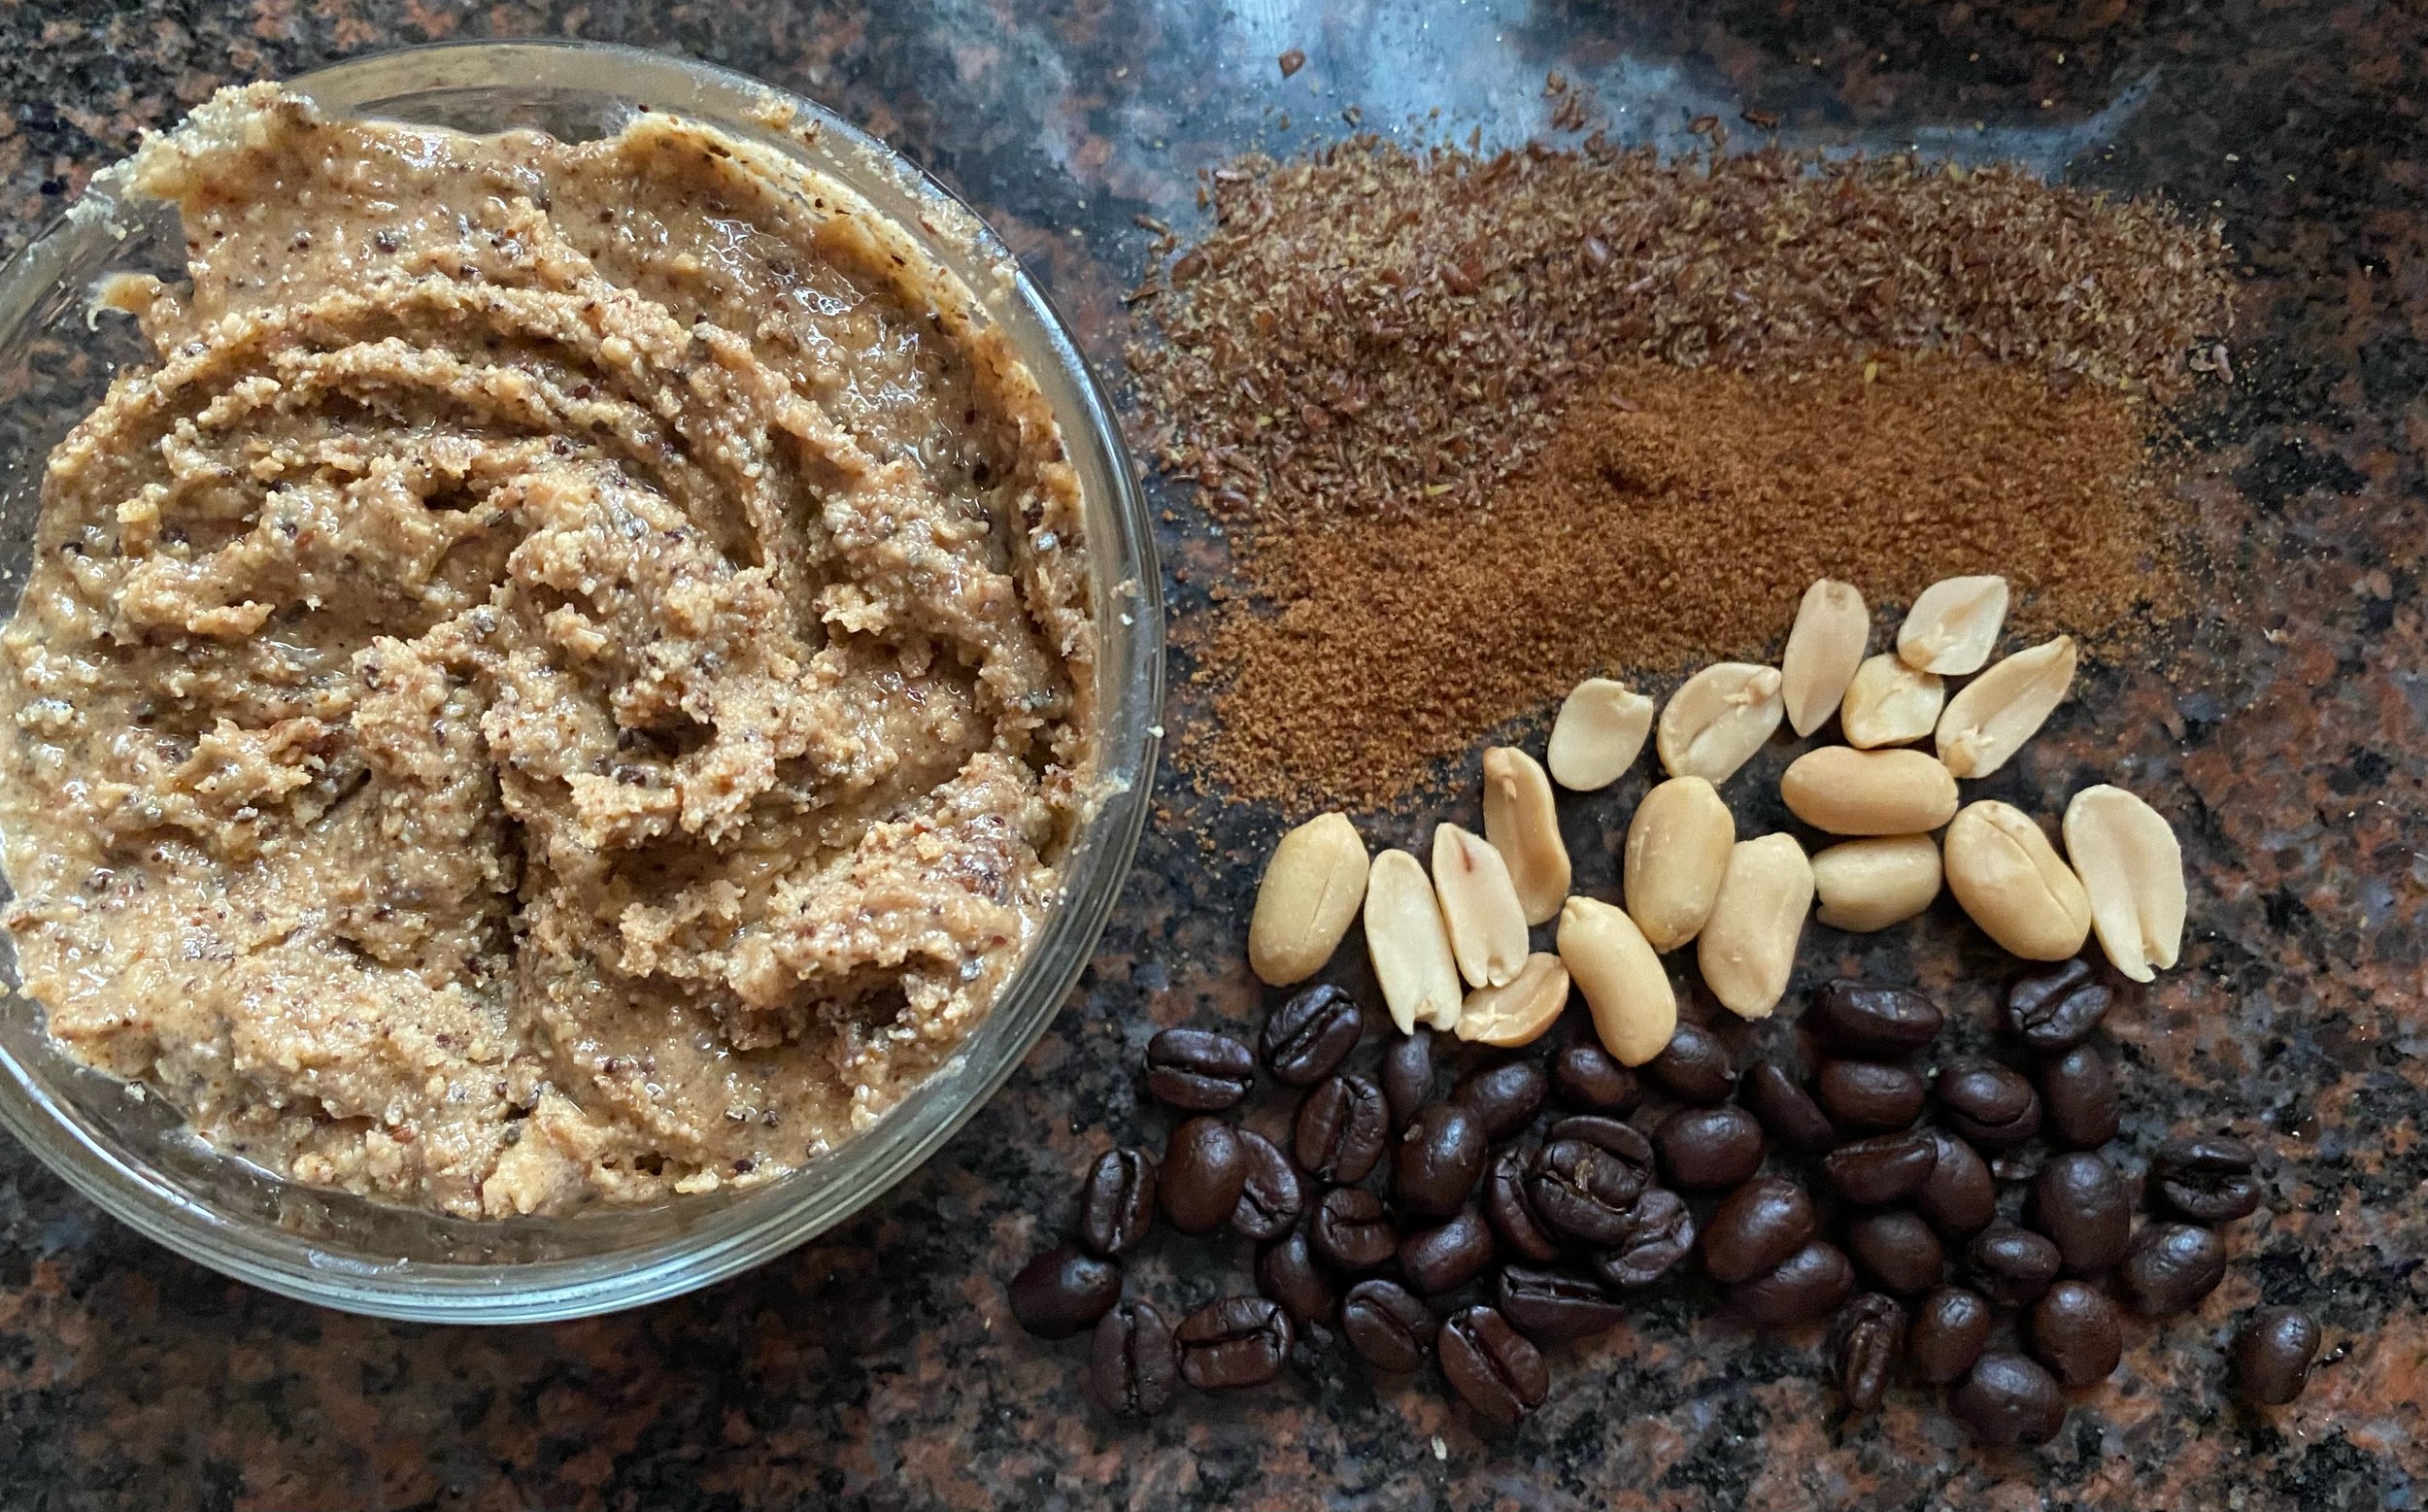 Eco-novice: Hate Stirring Natural Nut Butters? Read This.